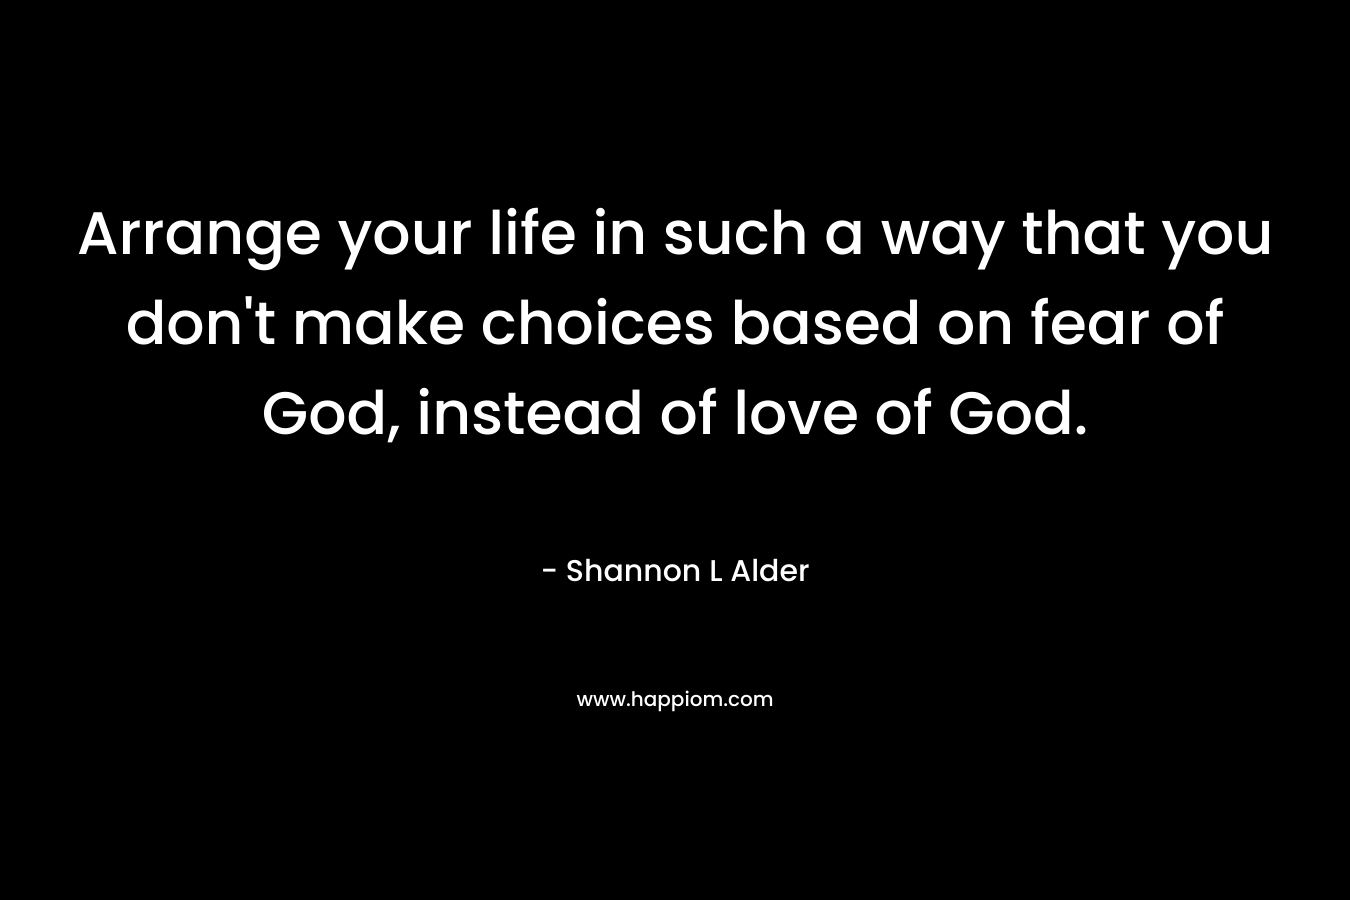 Arrange your life in such a way that you don’t make choices based on fear of God, instead of love of God. – Shannon L Alder